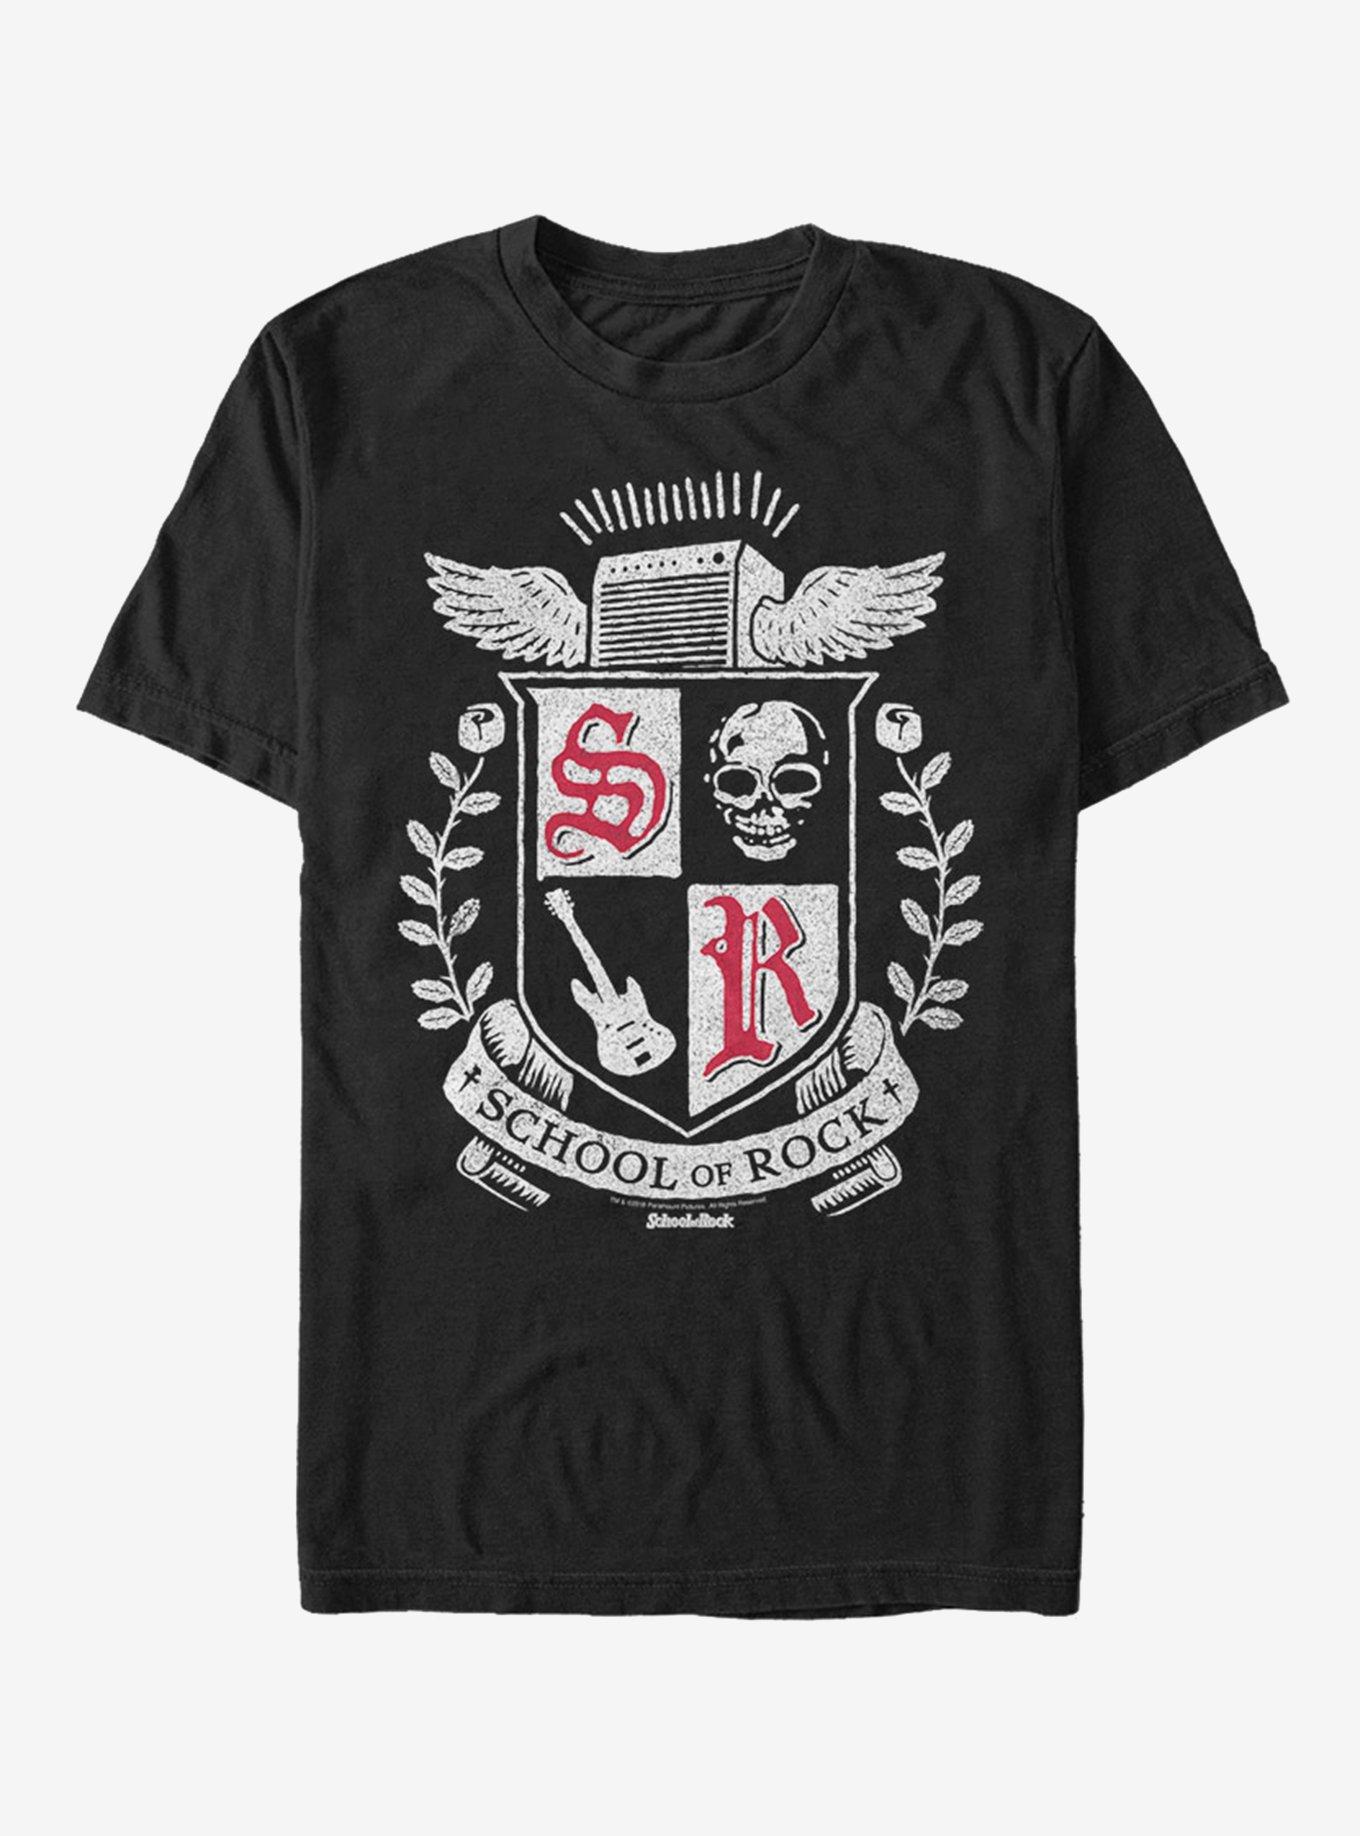 synder Tyggegummi invadere School of Rock T-Shirt - BLACK | Hot Topic